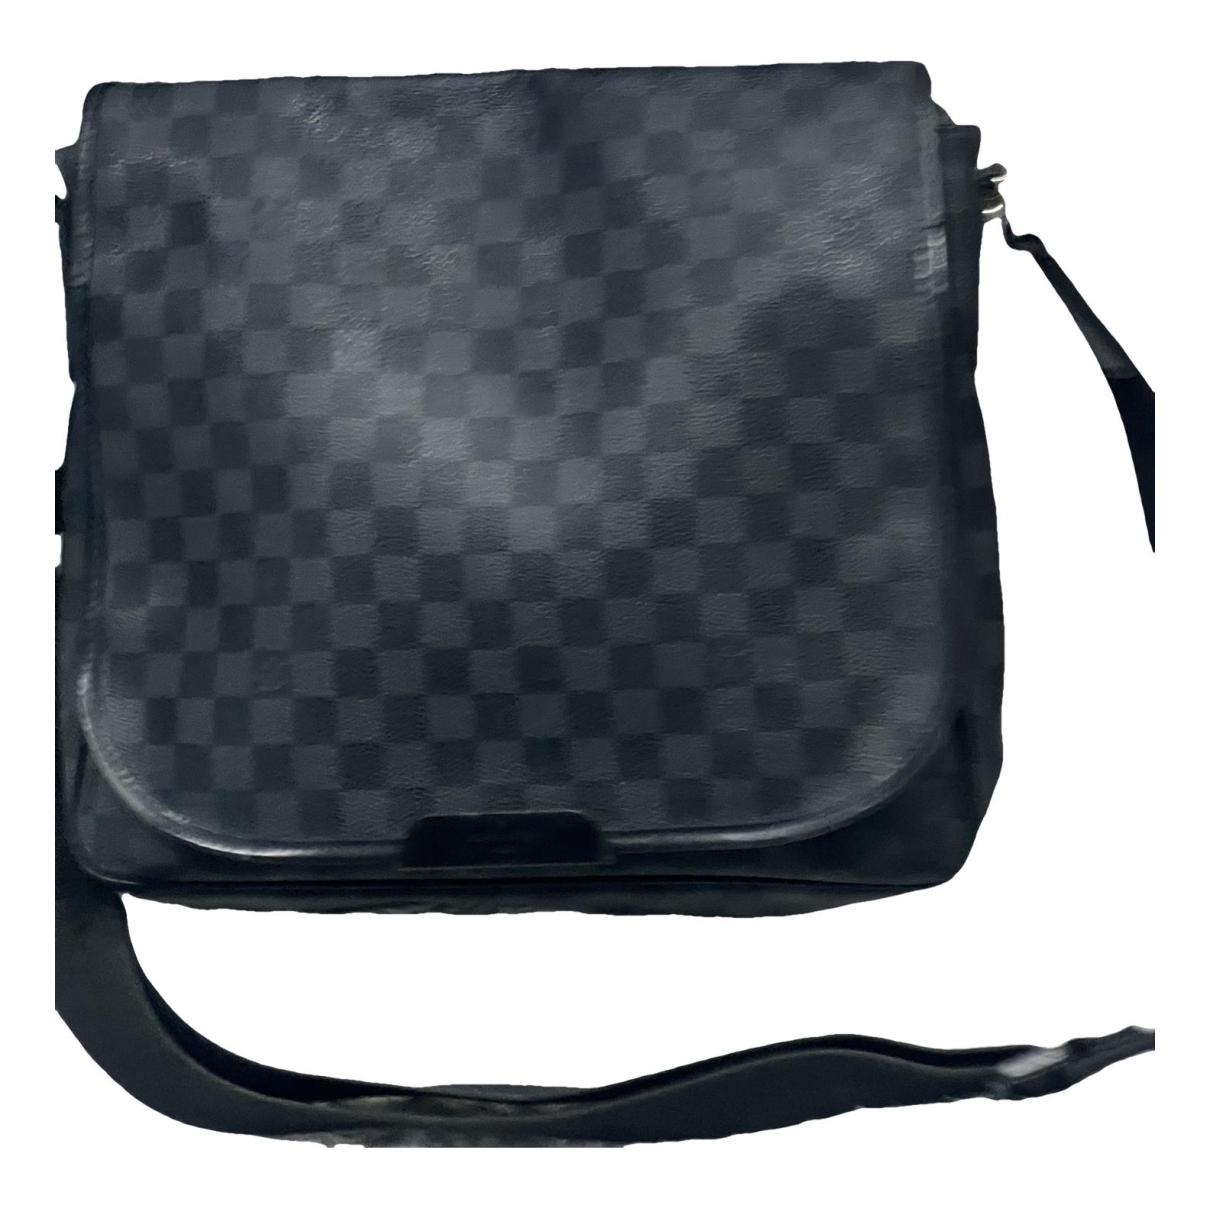 District leather bag Louis Vuitton Black in Leather - 29451604